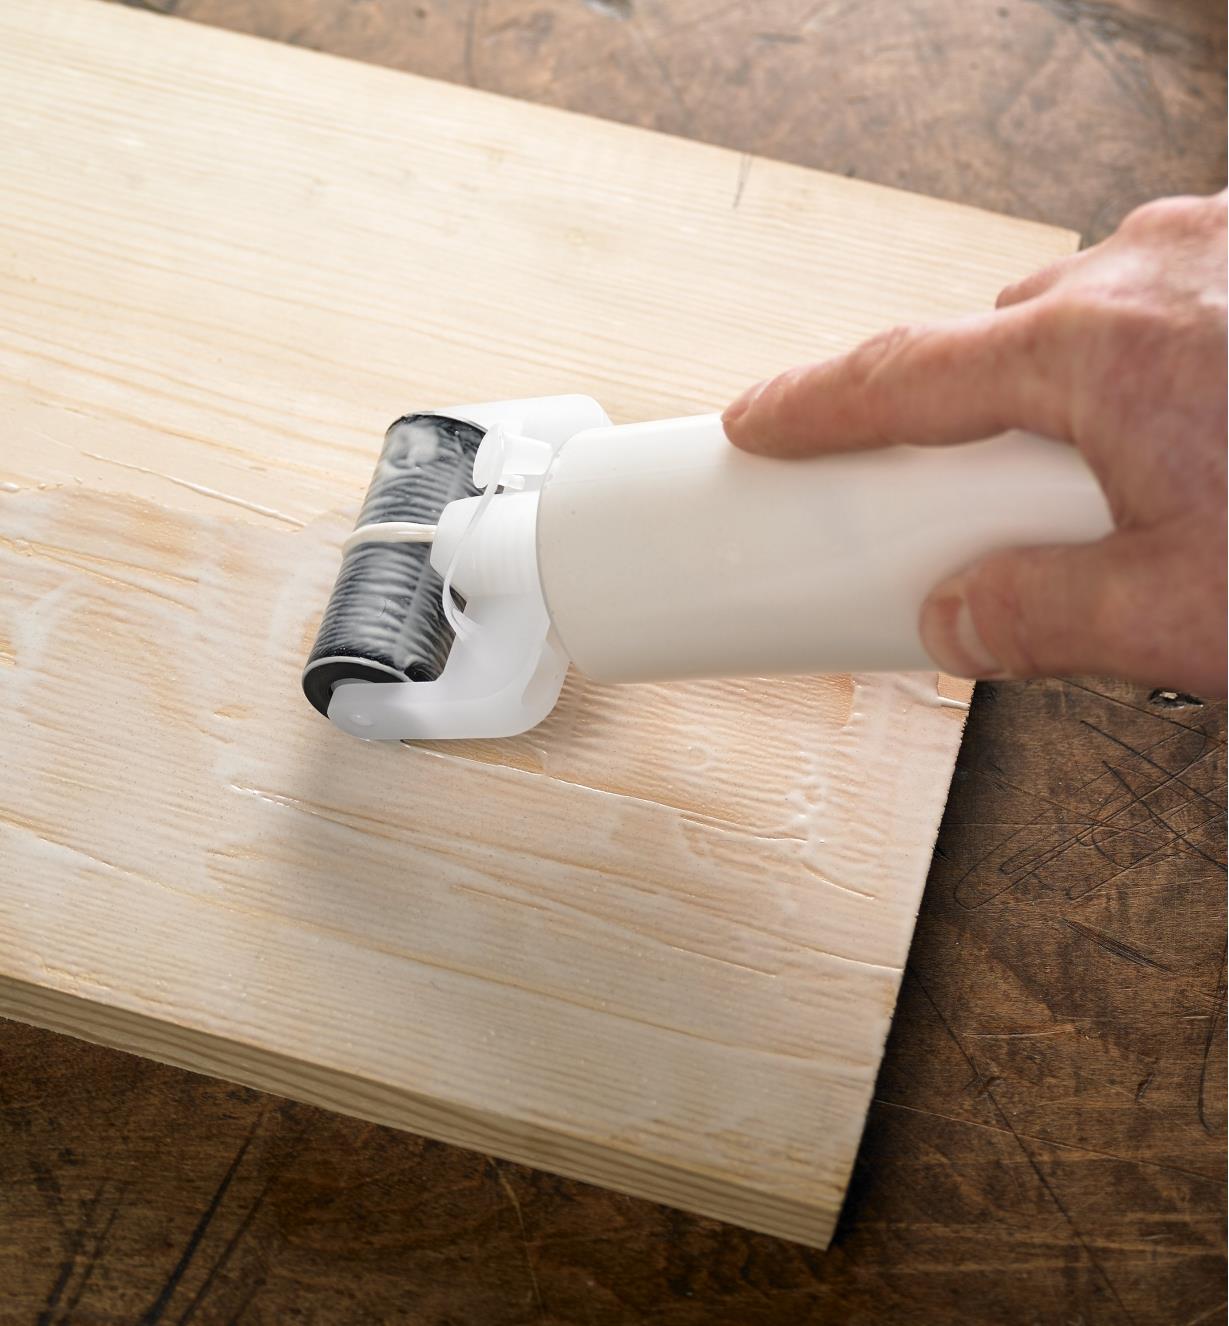 Spreading glue onto a board with the Roller Glue Applicator